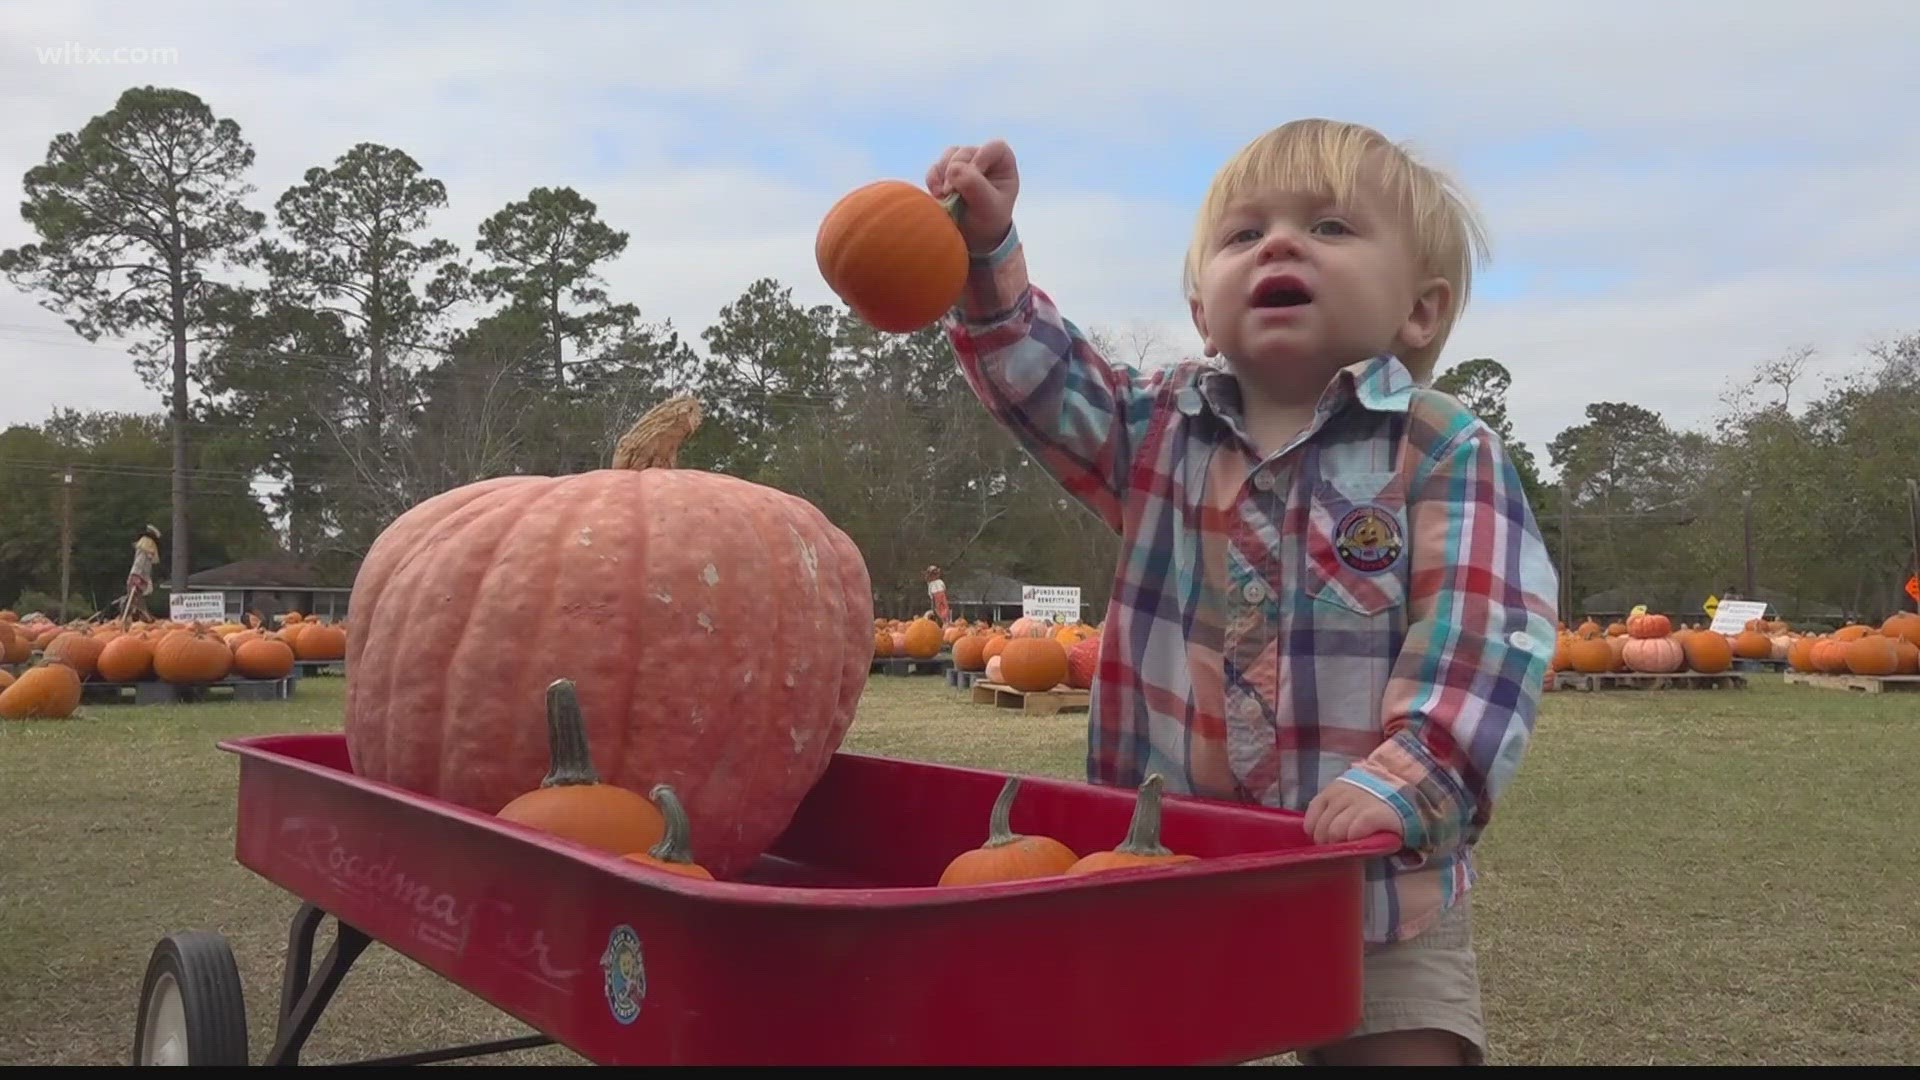 A Sumter church uses the pumpkin patch to help raise money for charities.